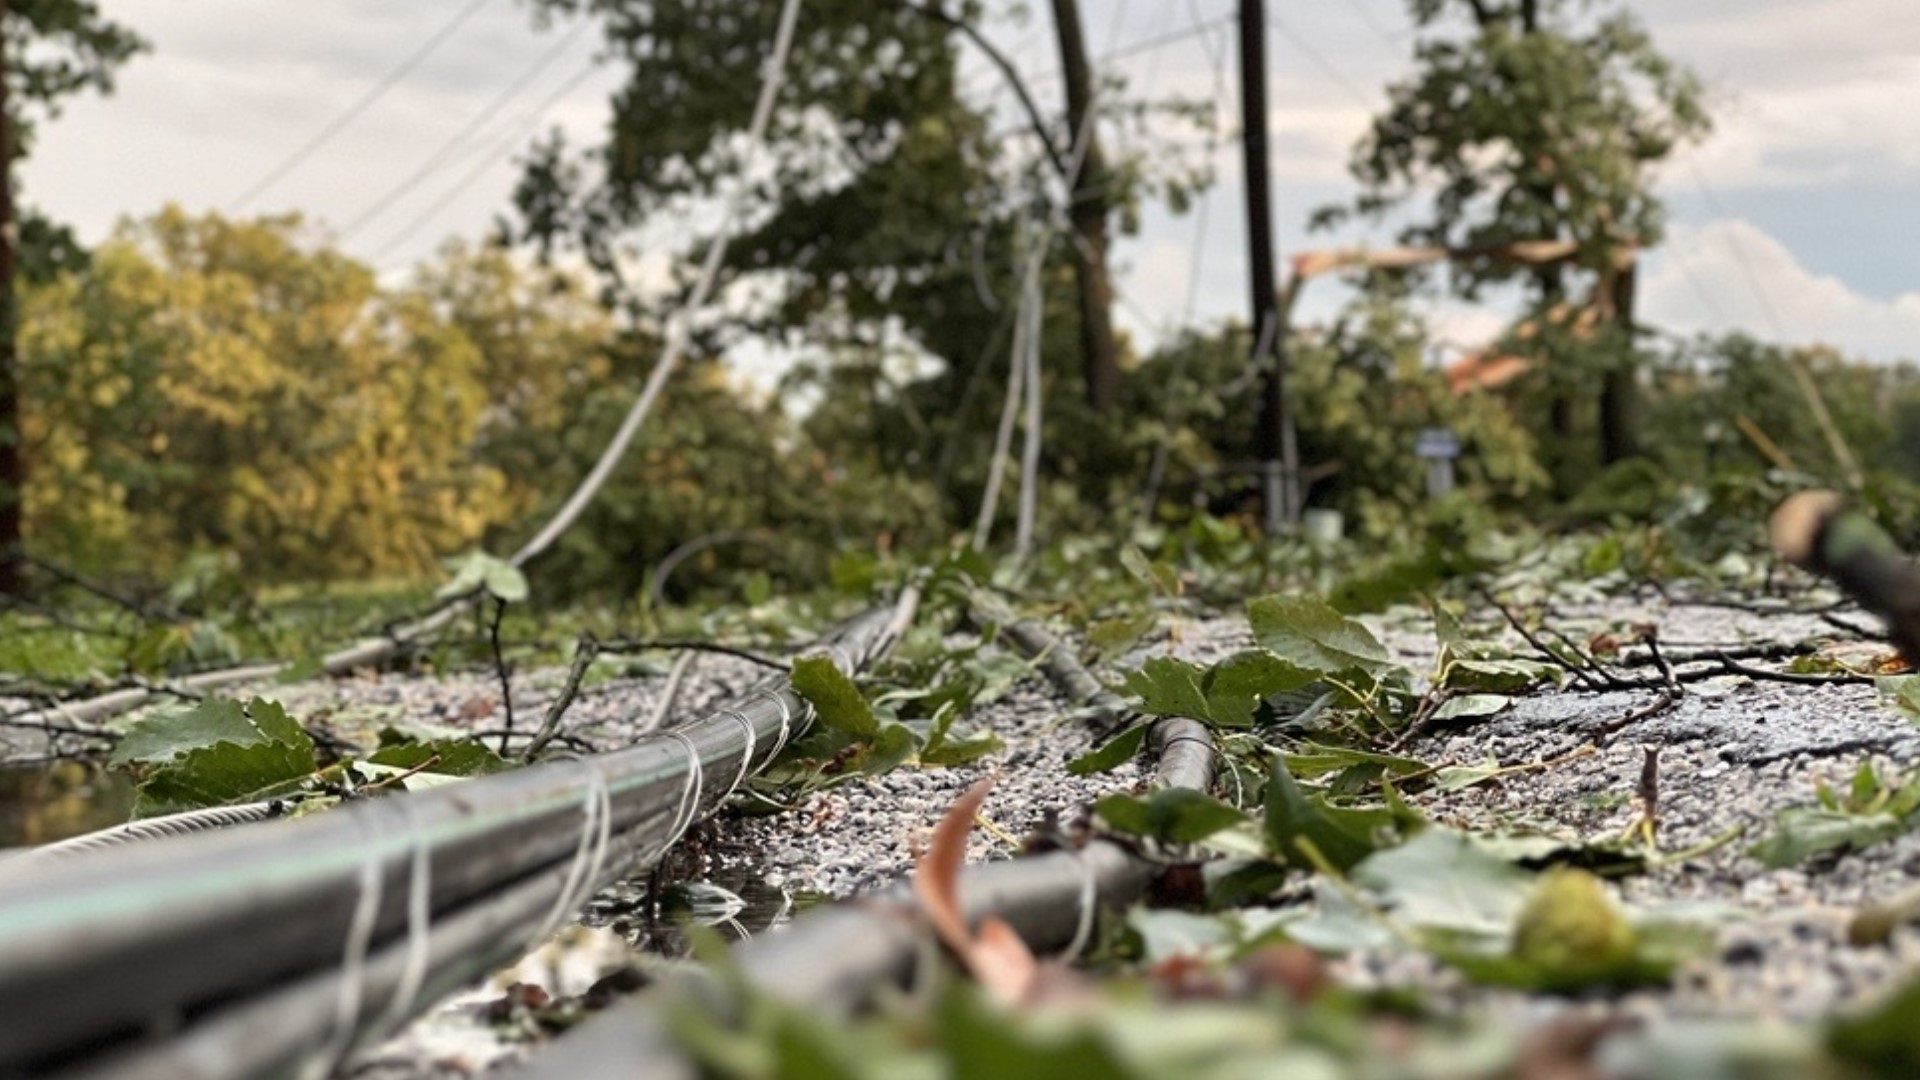 Damage was not hard to find in southern York County Monday night, after a line of thunderstorms swept through the area.